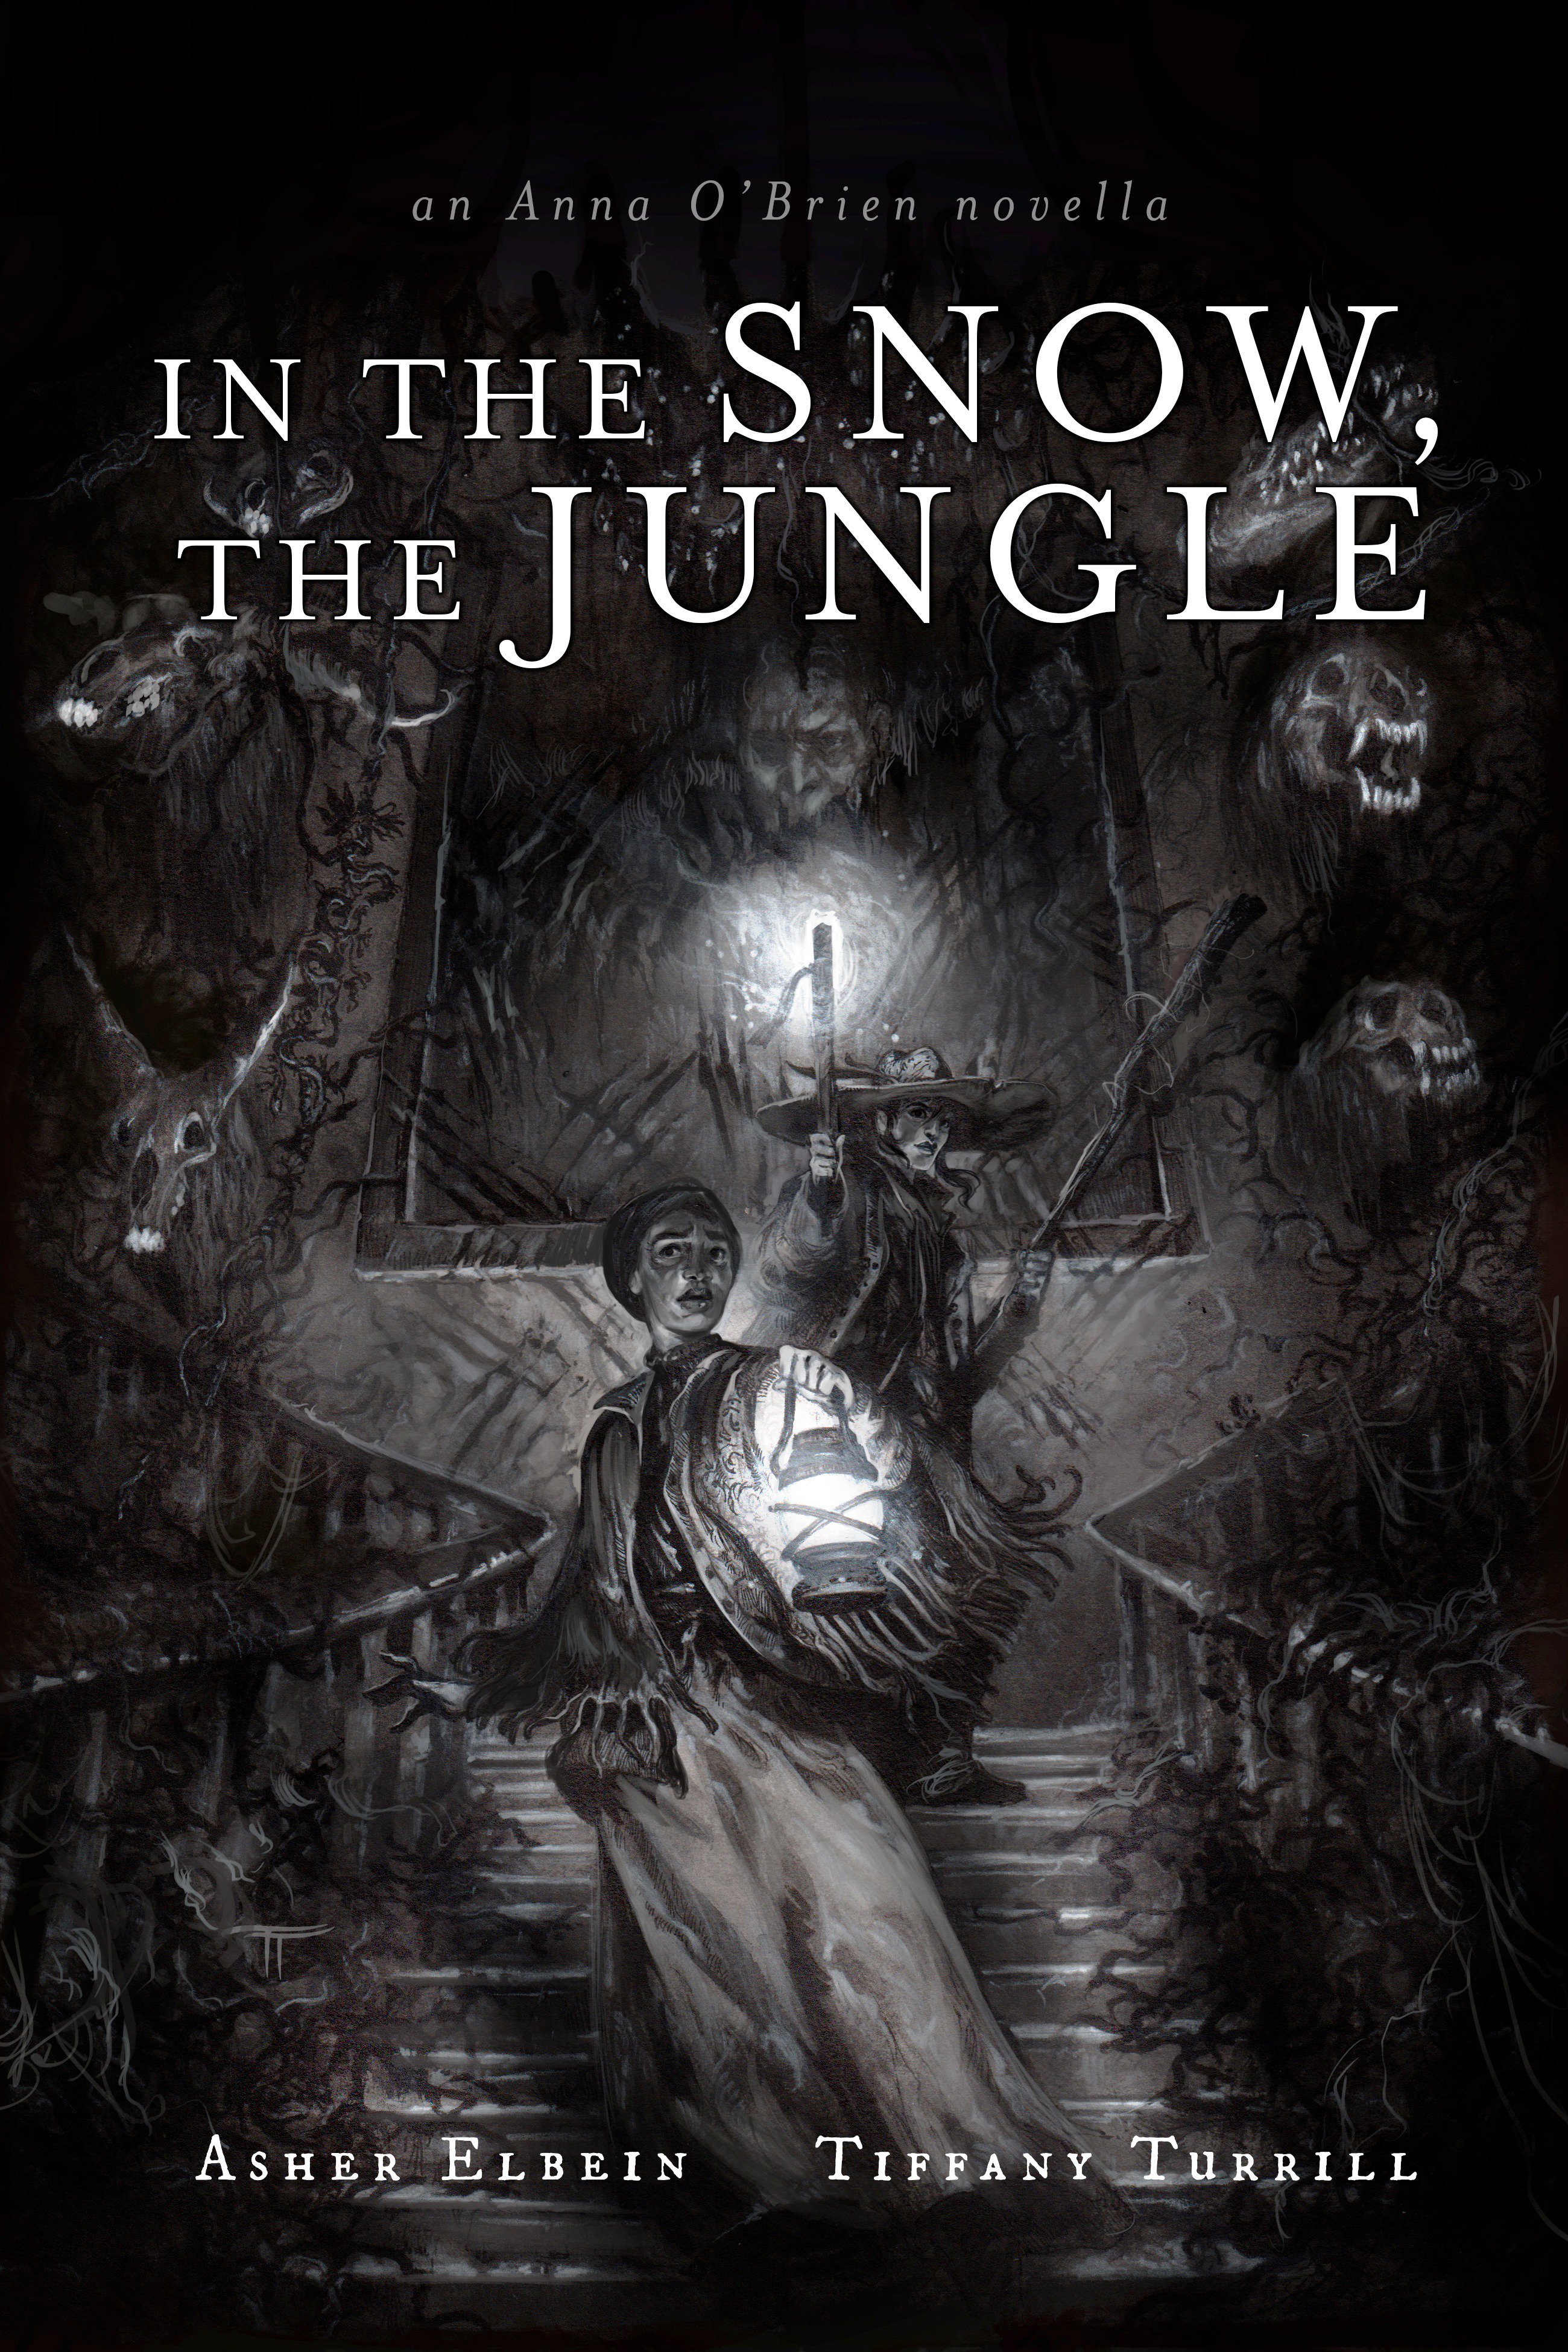 Cover art of Asher Elbein's In the Snow, the Jungle, illustrated by Tiffany Turrill, featuring two women exploring a freaky house full of animal skulls